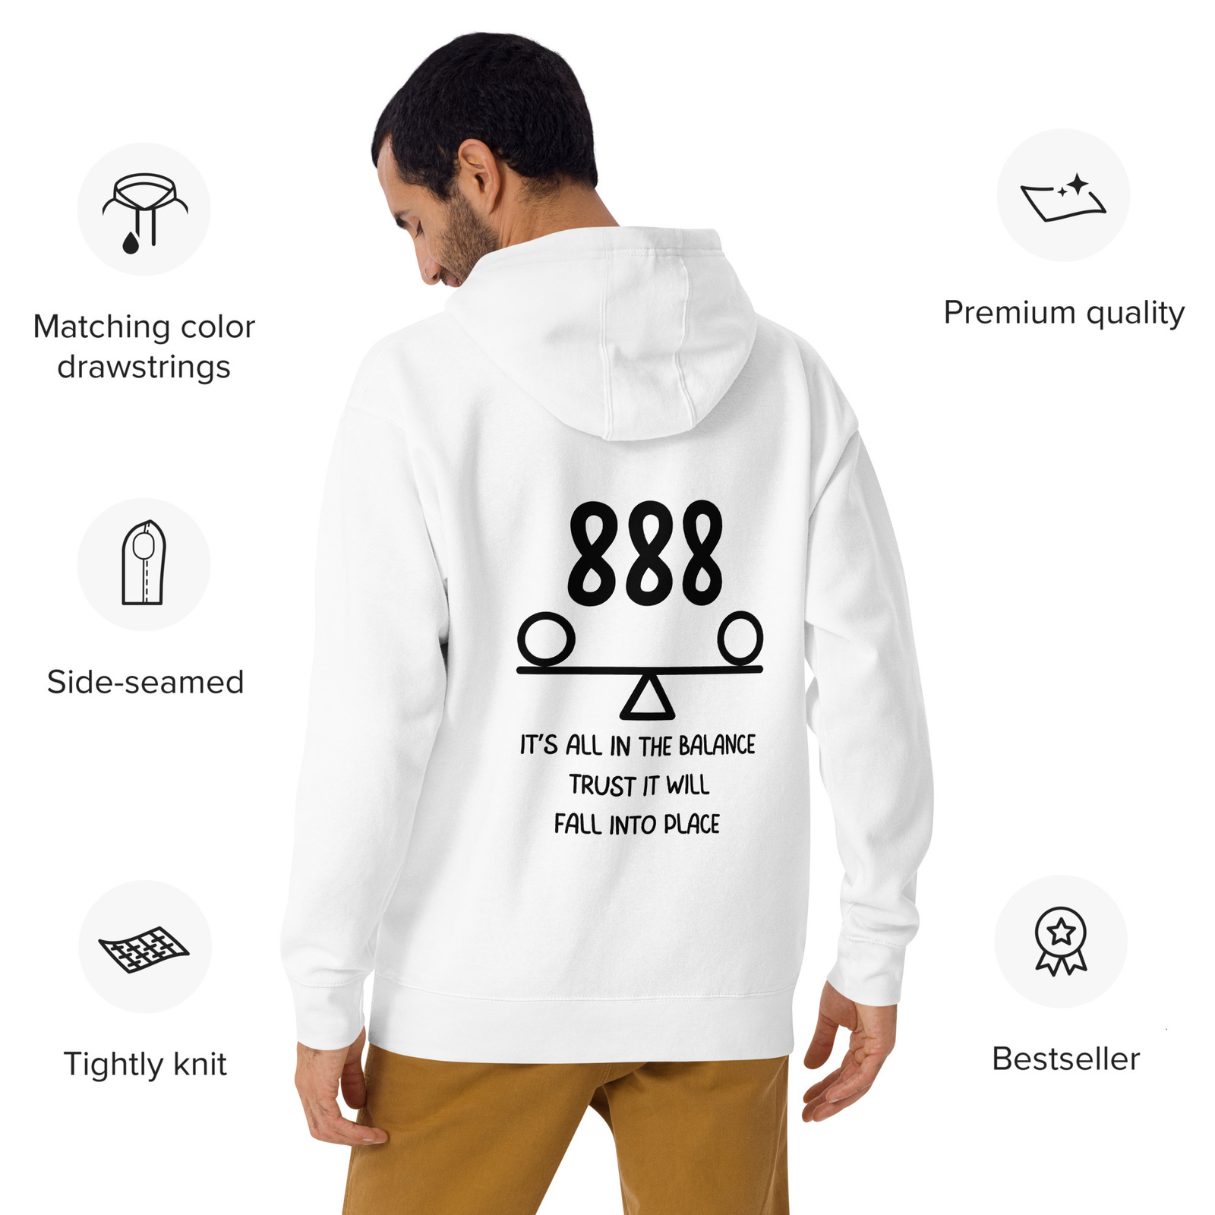 888 Angel Number Unisex Hoodie - Angel Number Collection by The Banannie Diaries